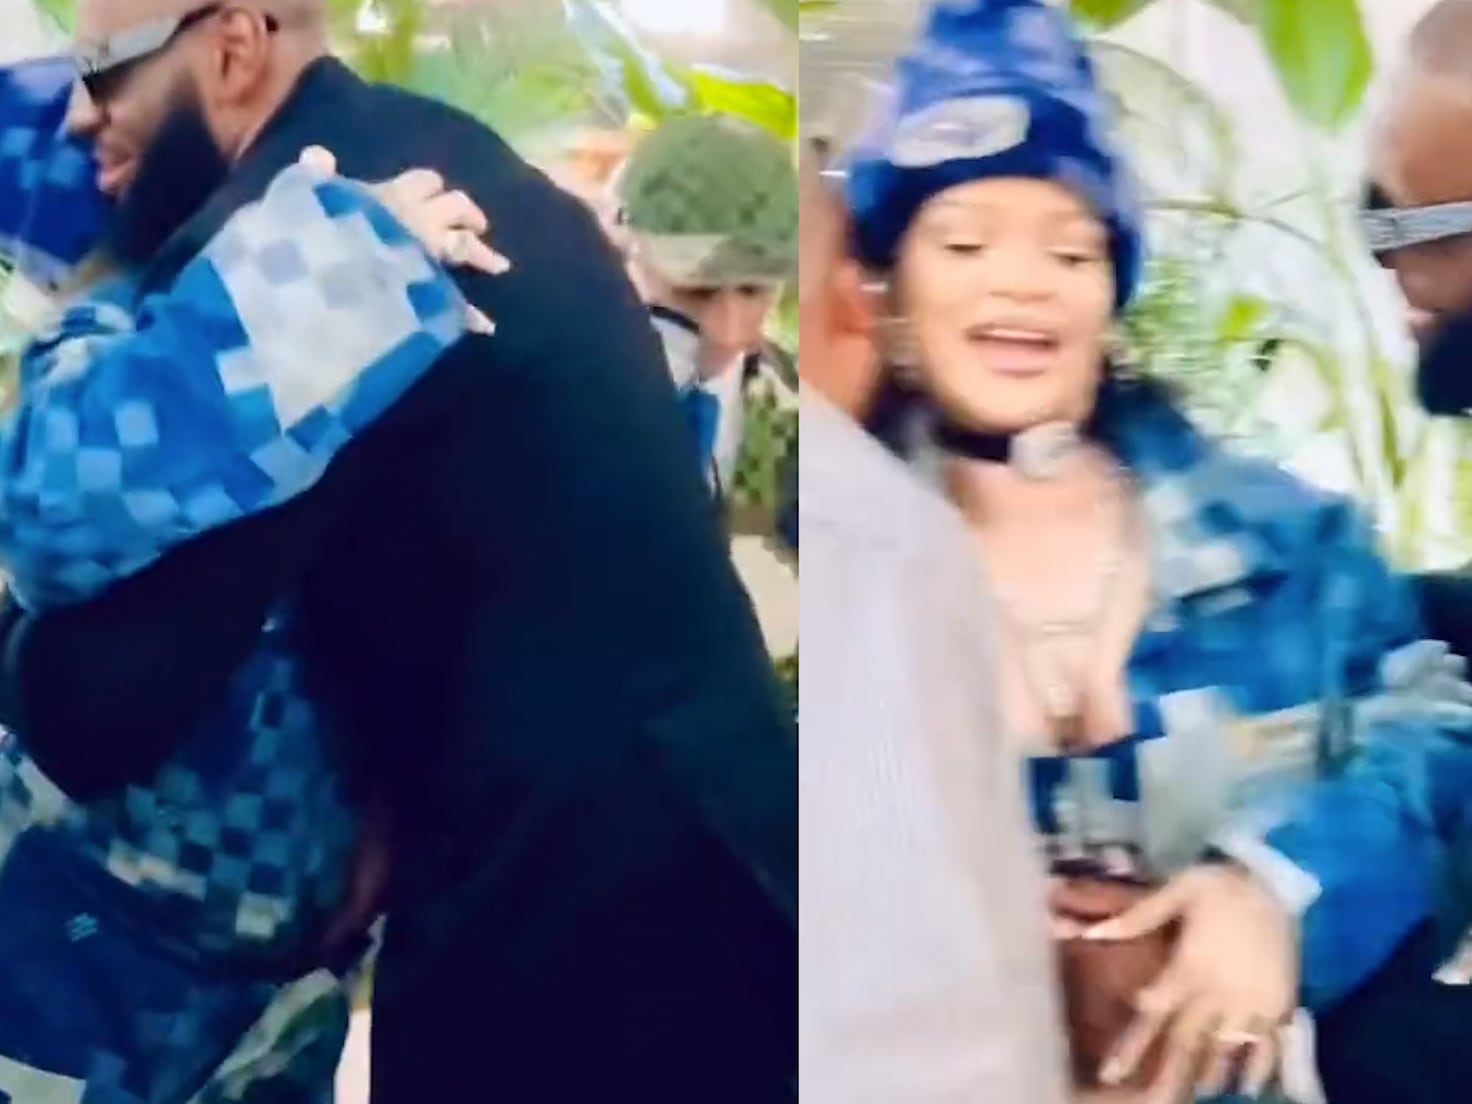 lebron james: LeBron James gently rubs pregnant belly of Rihanna at Louis  Vuitton show in Paris. Watch adorable video here - The Economic Times